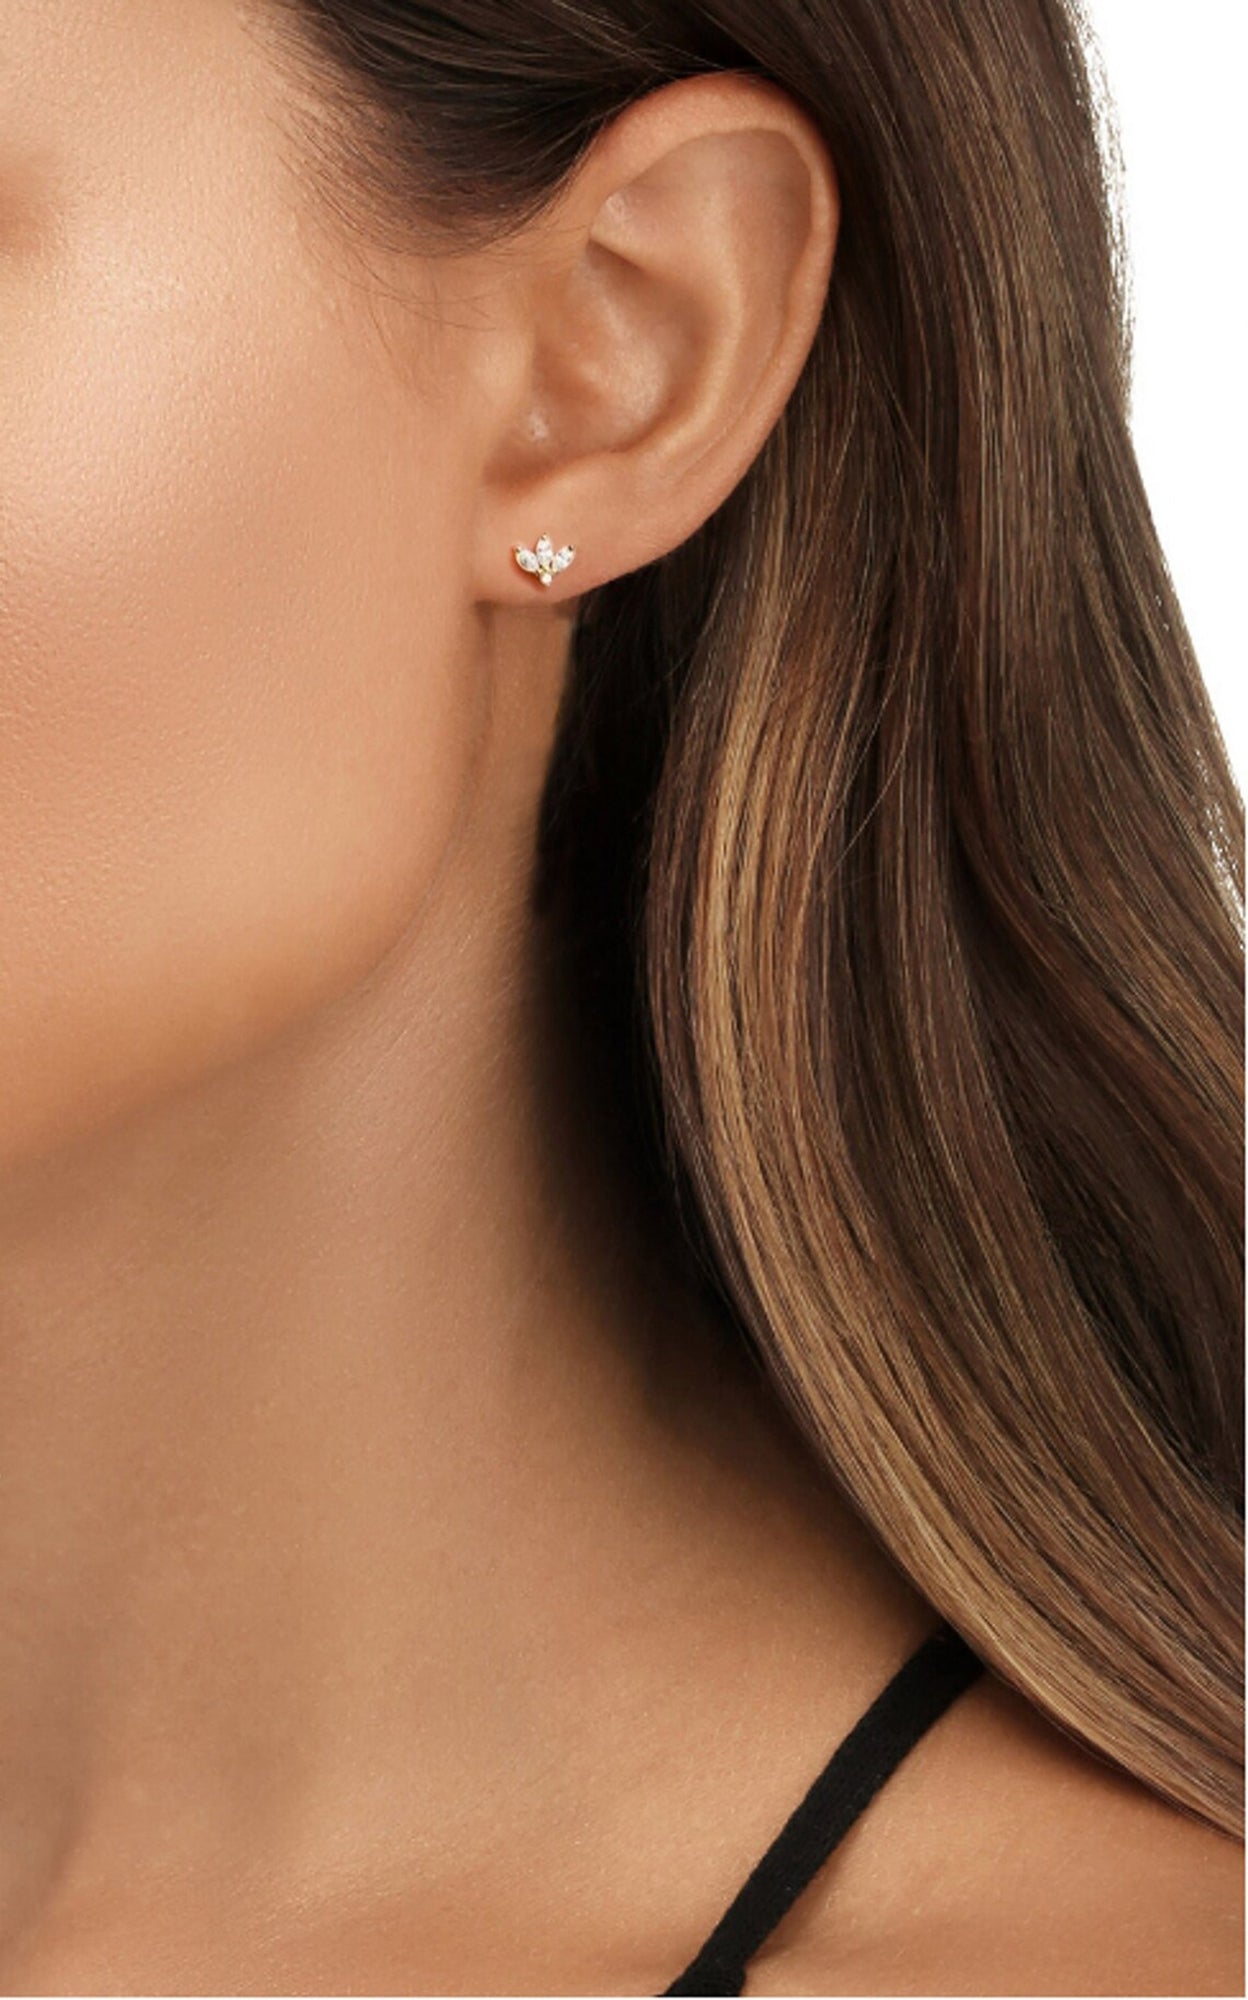 Tan and brunette model turned in a profile view to show off her diamond cz gold stud earrings.